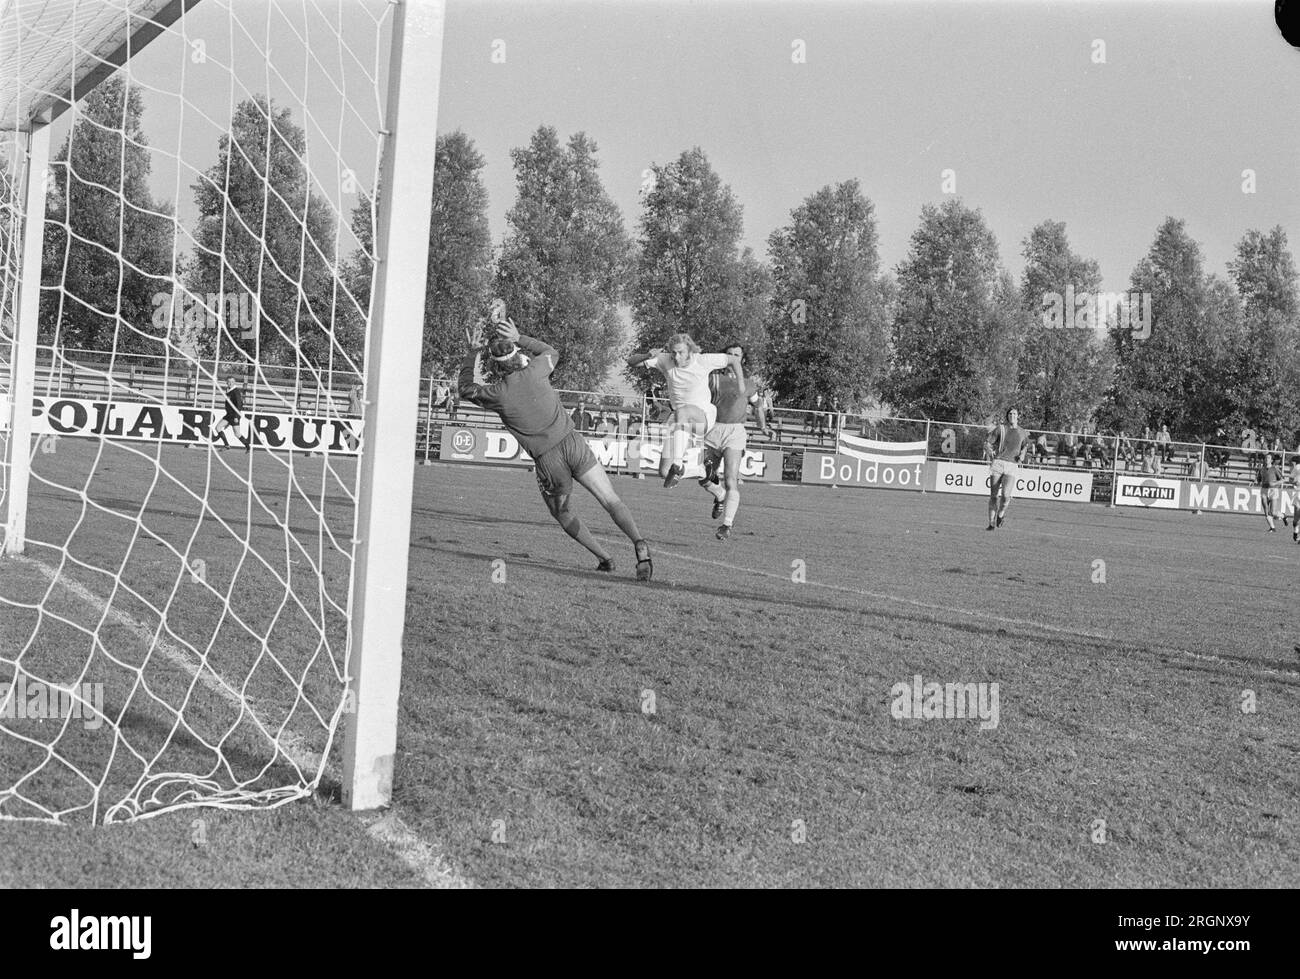 Volewijckers against FSC 1-2, Fiene shoots into the hands of FSC keeper Nieuwing, number 8 Ger Blok trainer Volewijckers (head); ca. August 1972 Stock Photo